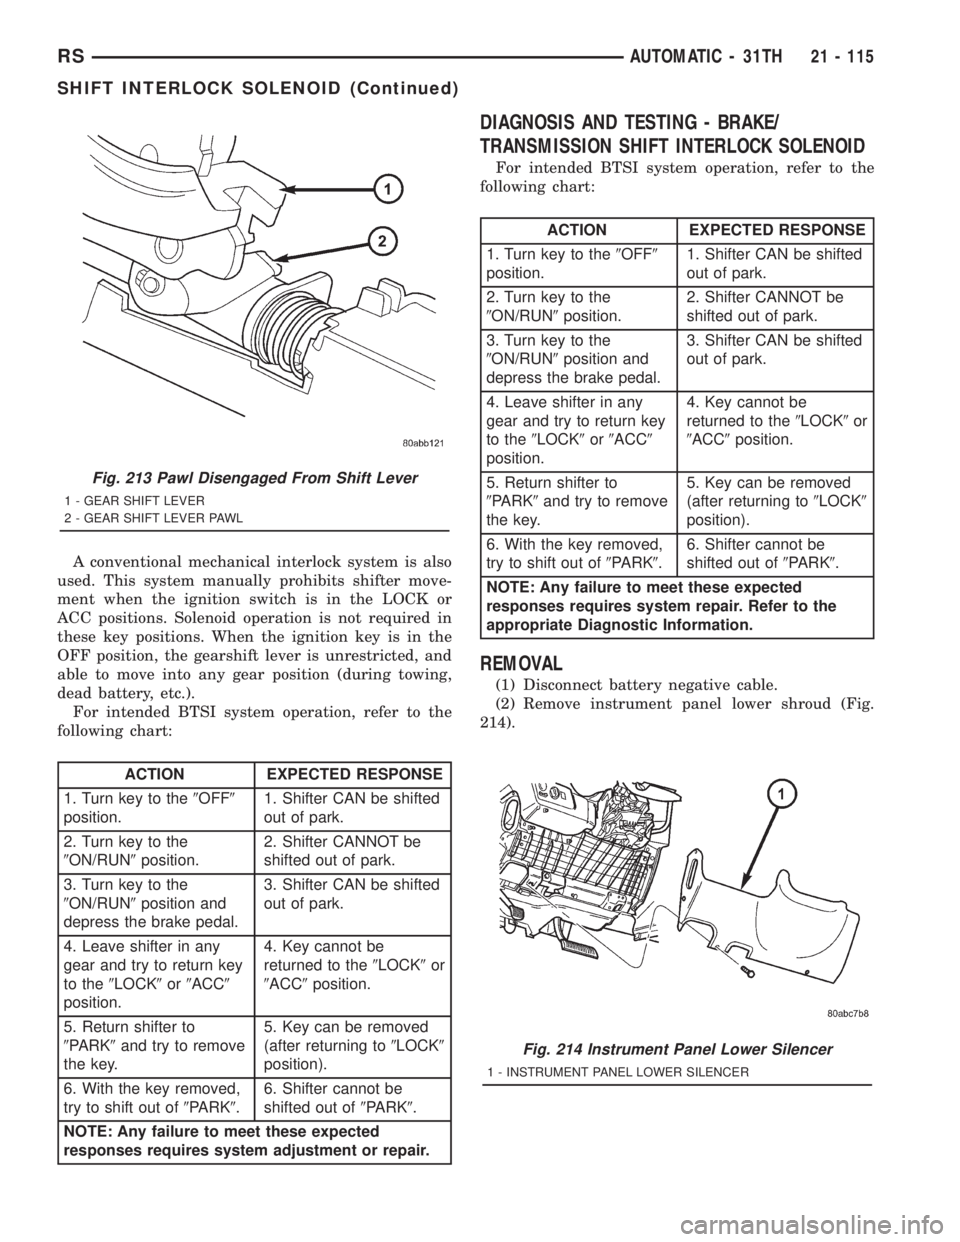 CHRYSLER VOYAGER 2001  Service Manual A conventional mechanical interlock system is also
used. This system manually prohibits shifter move-
ment when the ignition switch is in the LOCK or
ACC positions. Solenoid operation is not required 